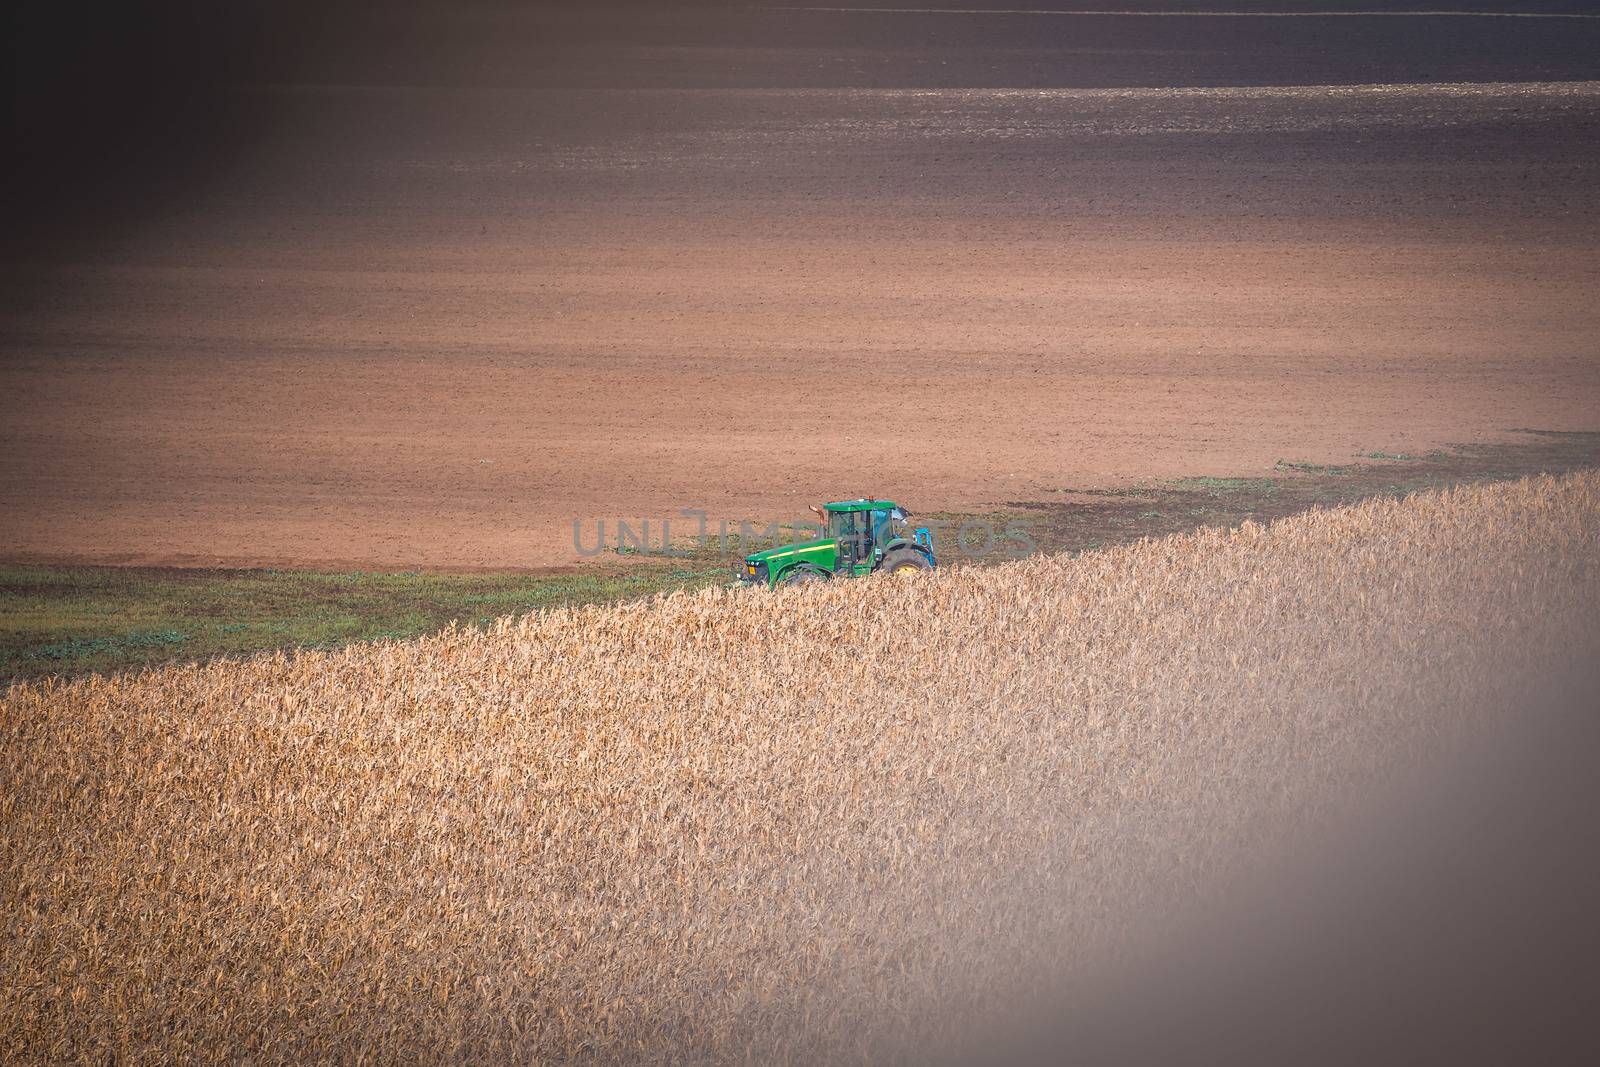 Agricultural farmers use tractors to plow and lift the soil to be high in growing plants in arid areas, far from water sources. Image shot from far away. by petrsvoboda91